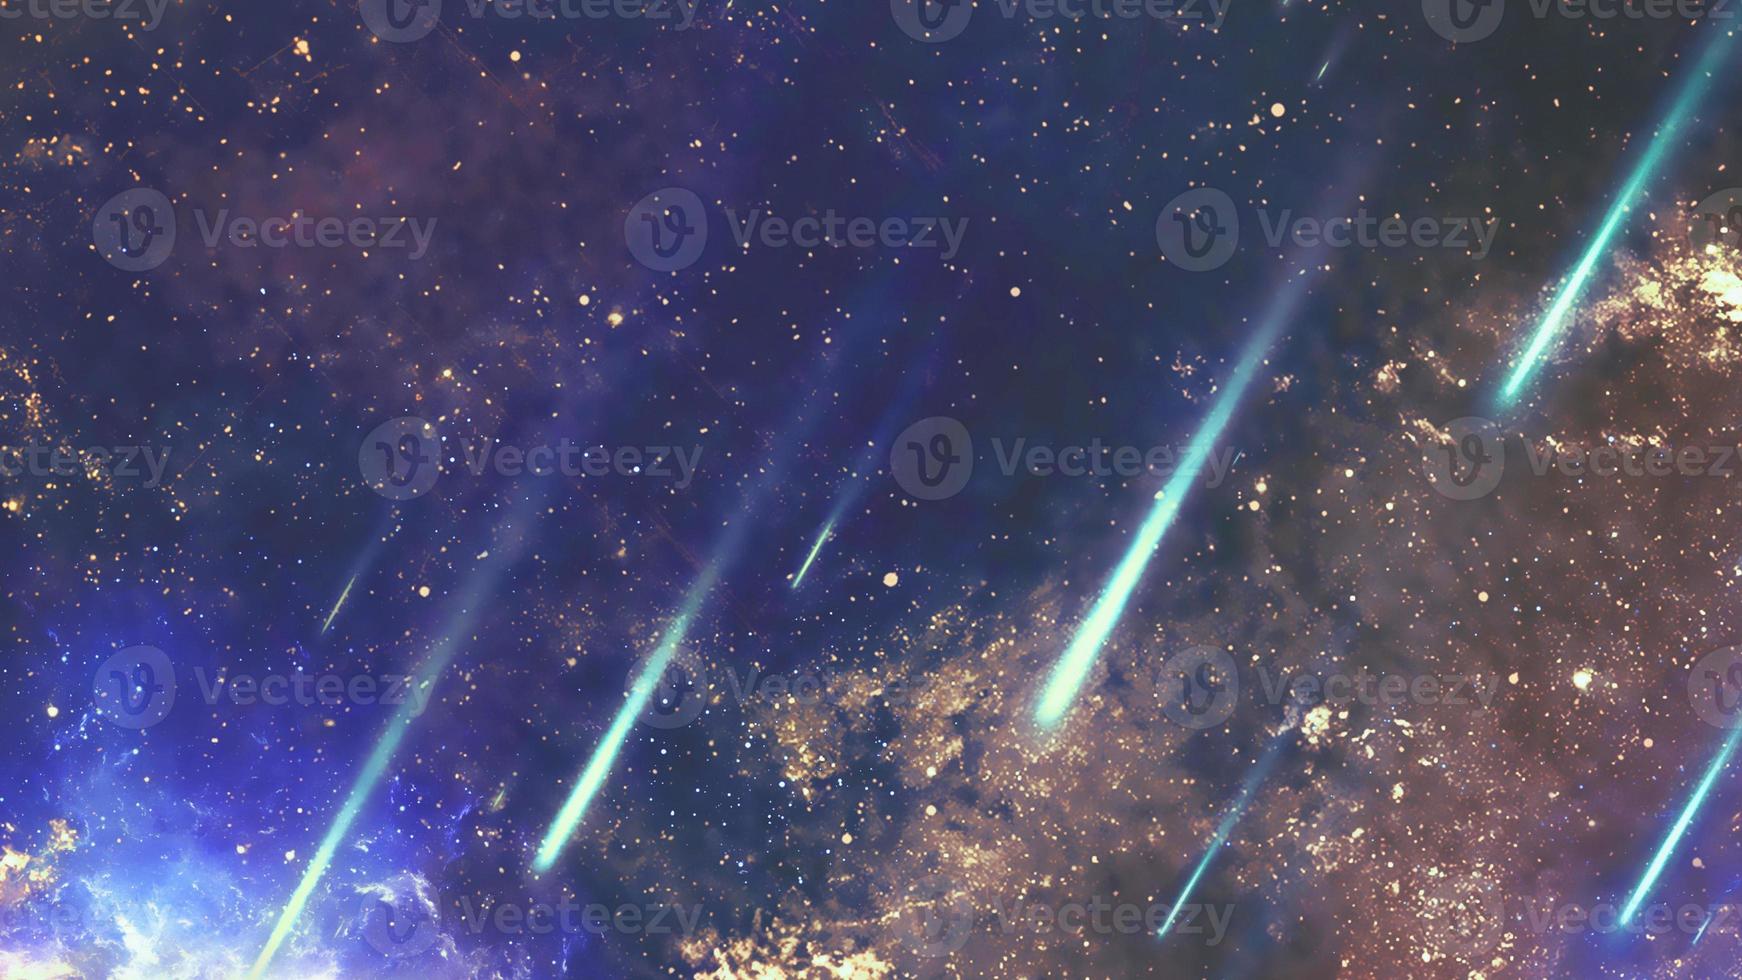 Infinite beautiful cosmos dark blue background with nebula, cluster of stars in outer space. Beauty of endless Universe filled stars.Cosmic art, science fiction wallpaper photo